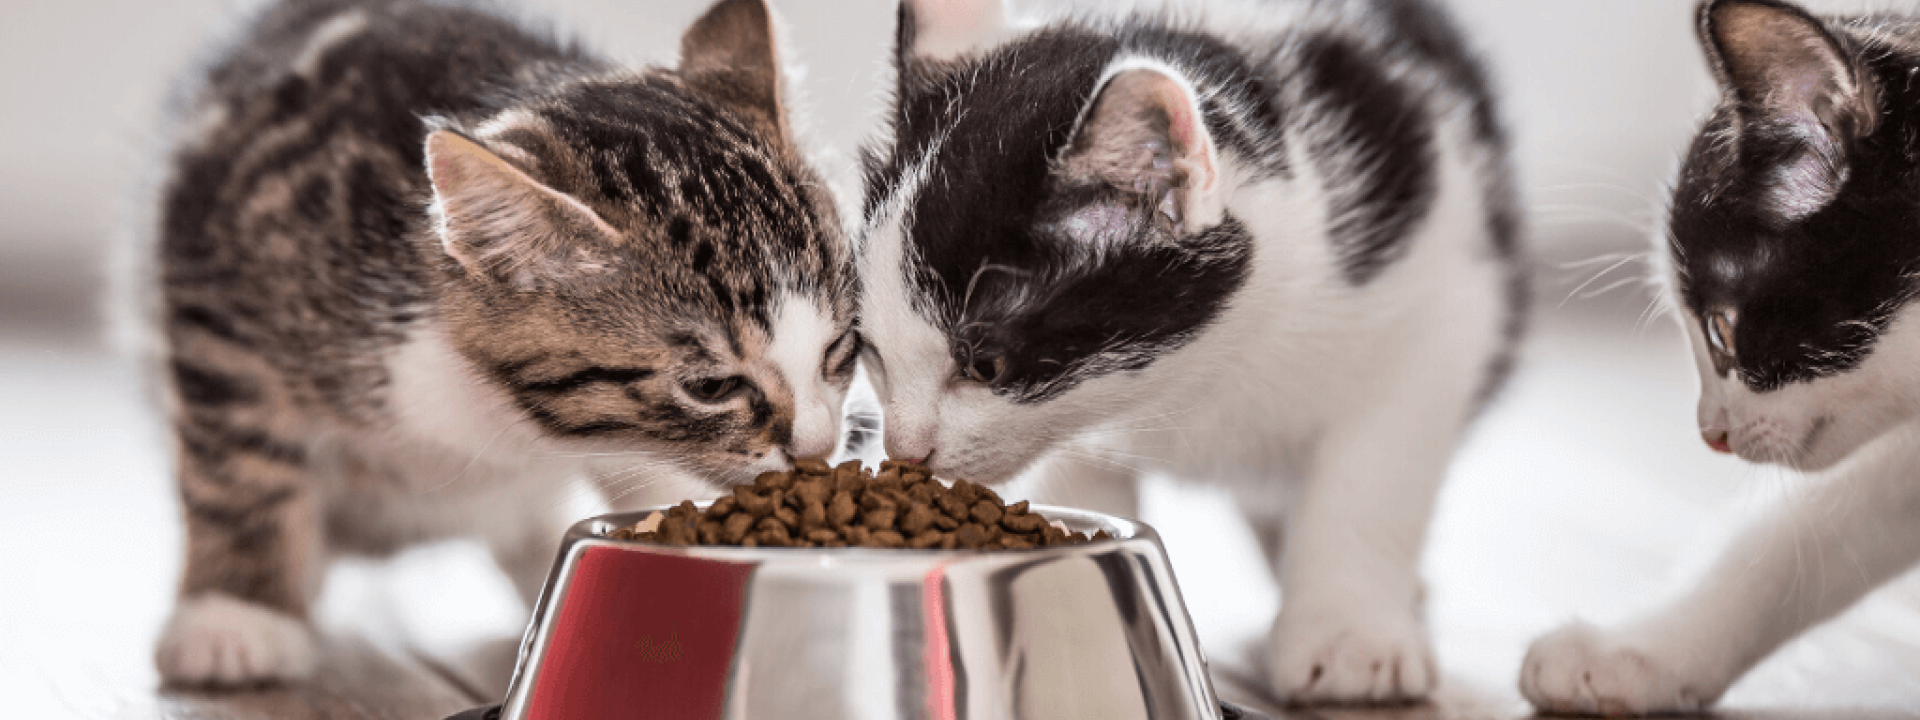 Foods to avoid feeding your cat